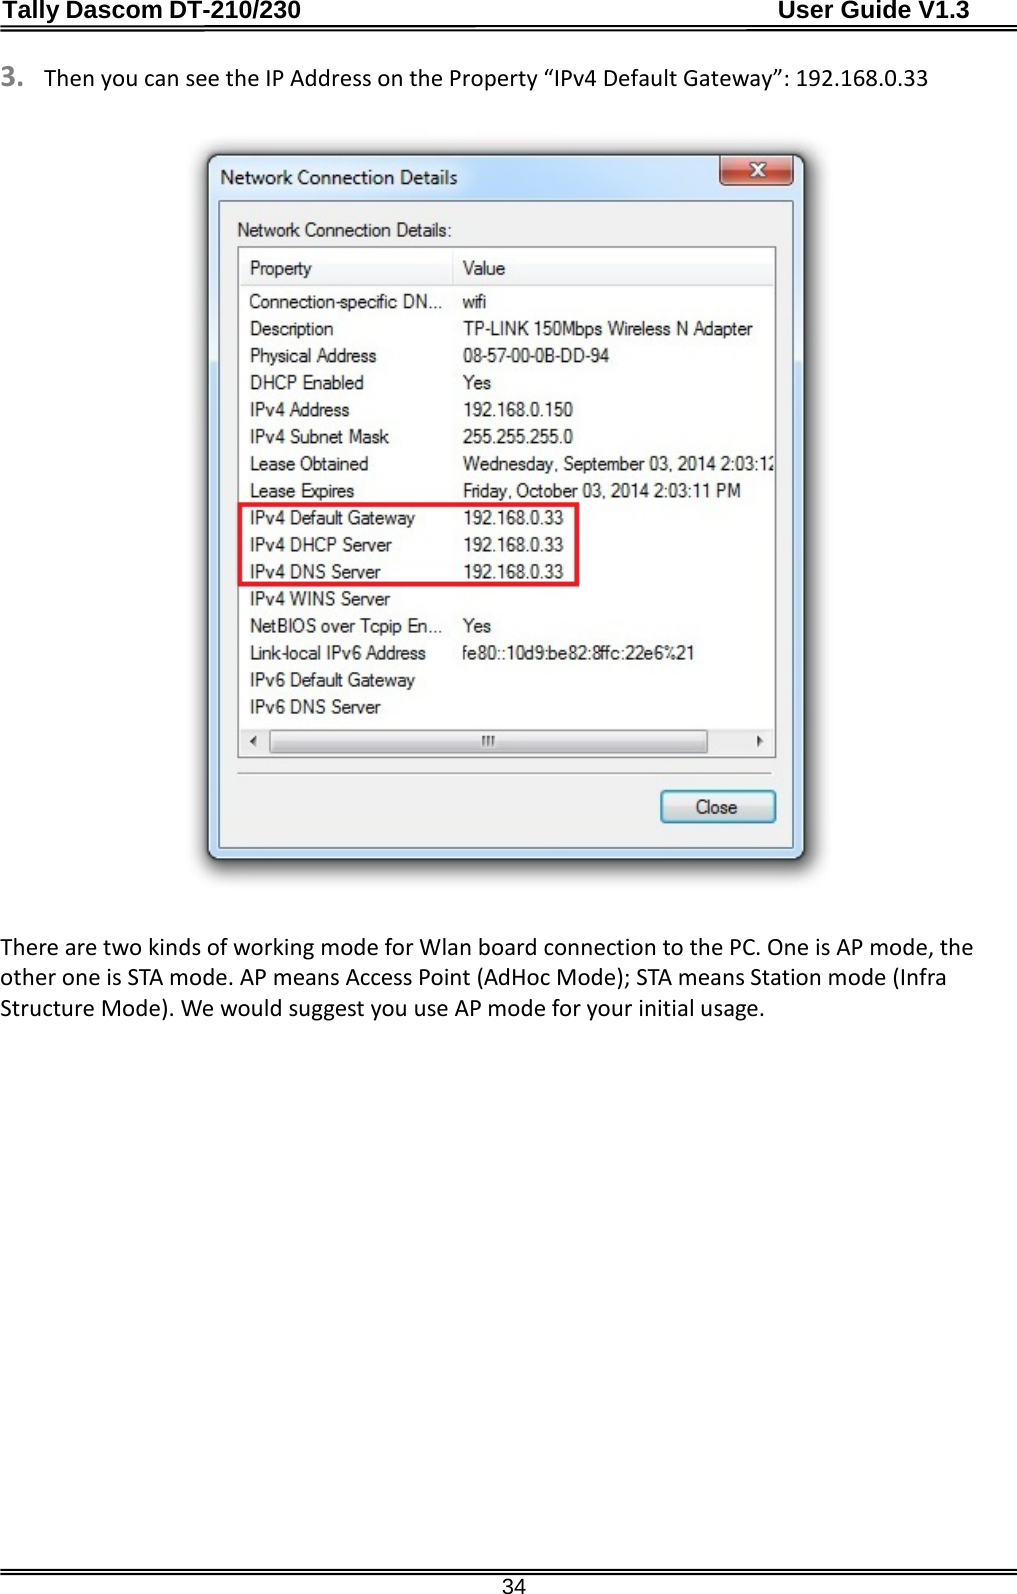 Tally Dascom DT-210/230                                      User Guide V1.3  34 3. Then you can see the IP Address on the Property “IPv4 Default Gateway”: 192.168.0.33  There are two kinds of working mode for Wlan board connection to the PC. One is AP mode, the other one is STA mode. AP means Access Point (AdHoc Mode); STA means Station mode (Infra Structure Mode). We would suggest you use AP mode for your initial usage.  